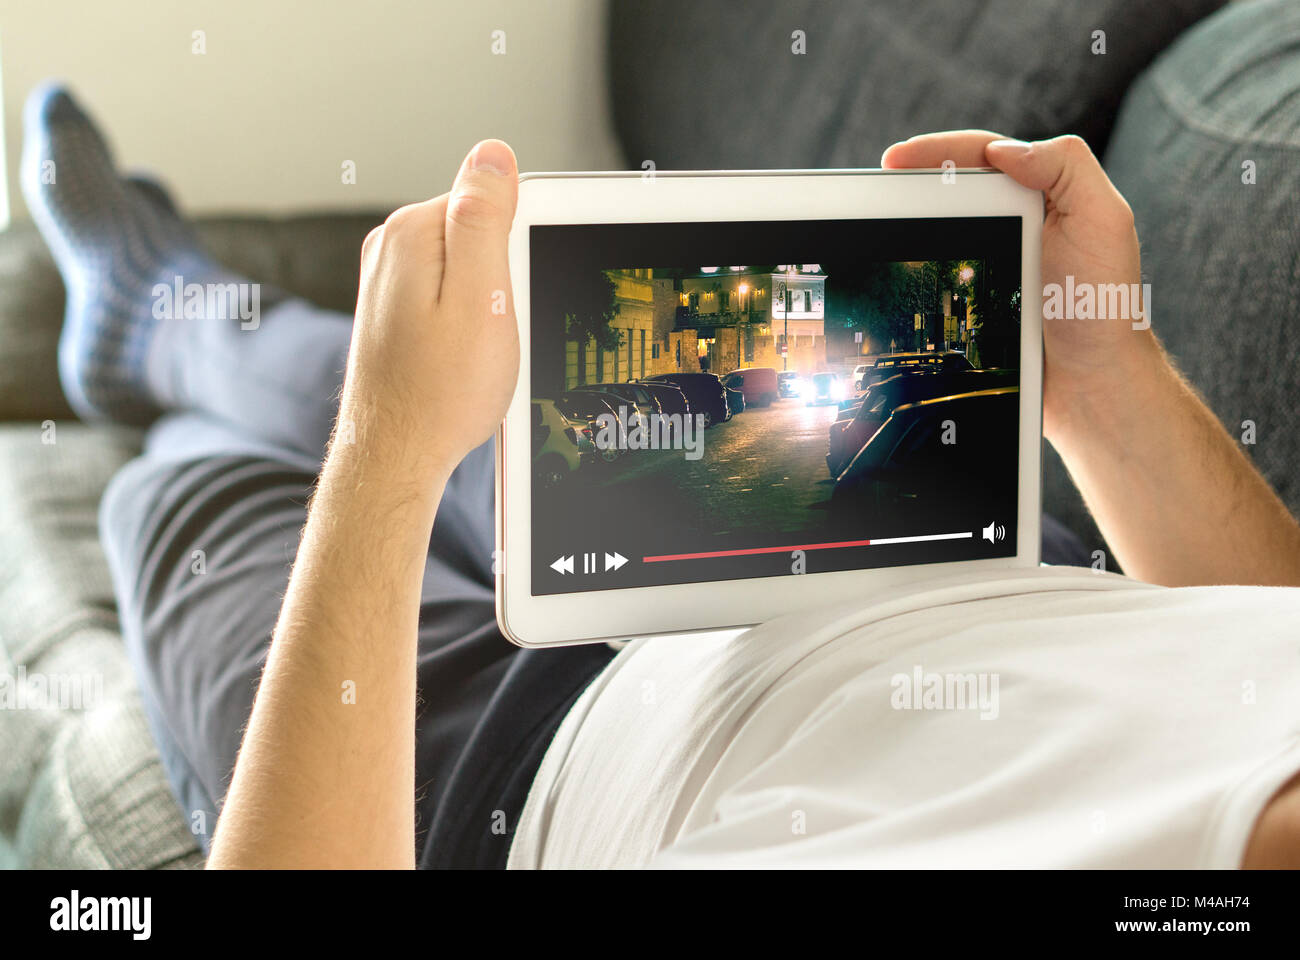 Online movie stream with mobile device. Man watching film on tablet with imaginary video player service. Stock Photo